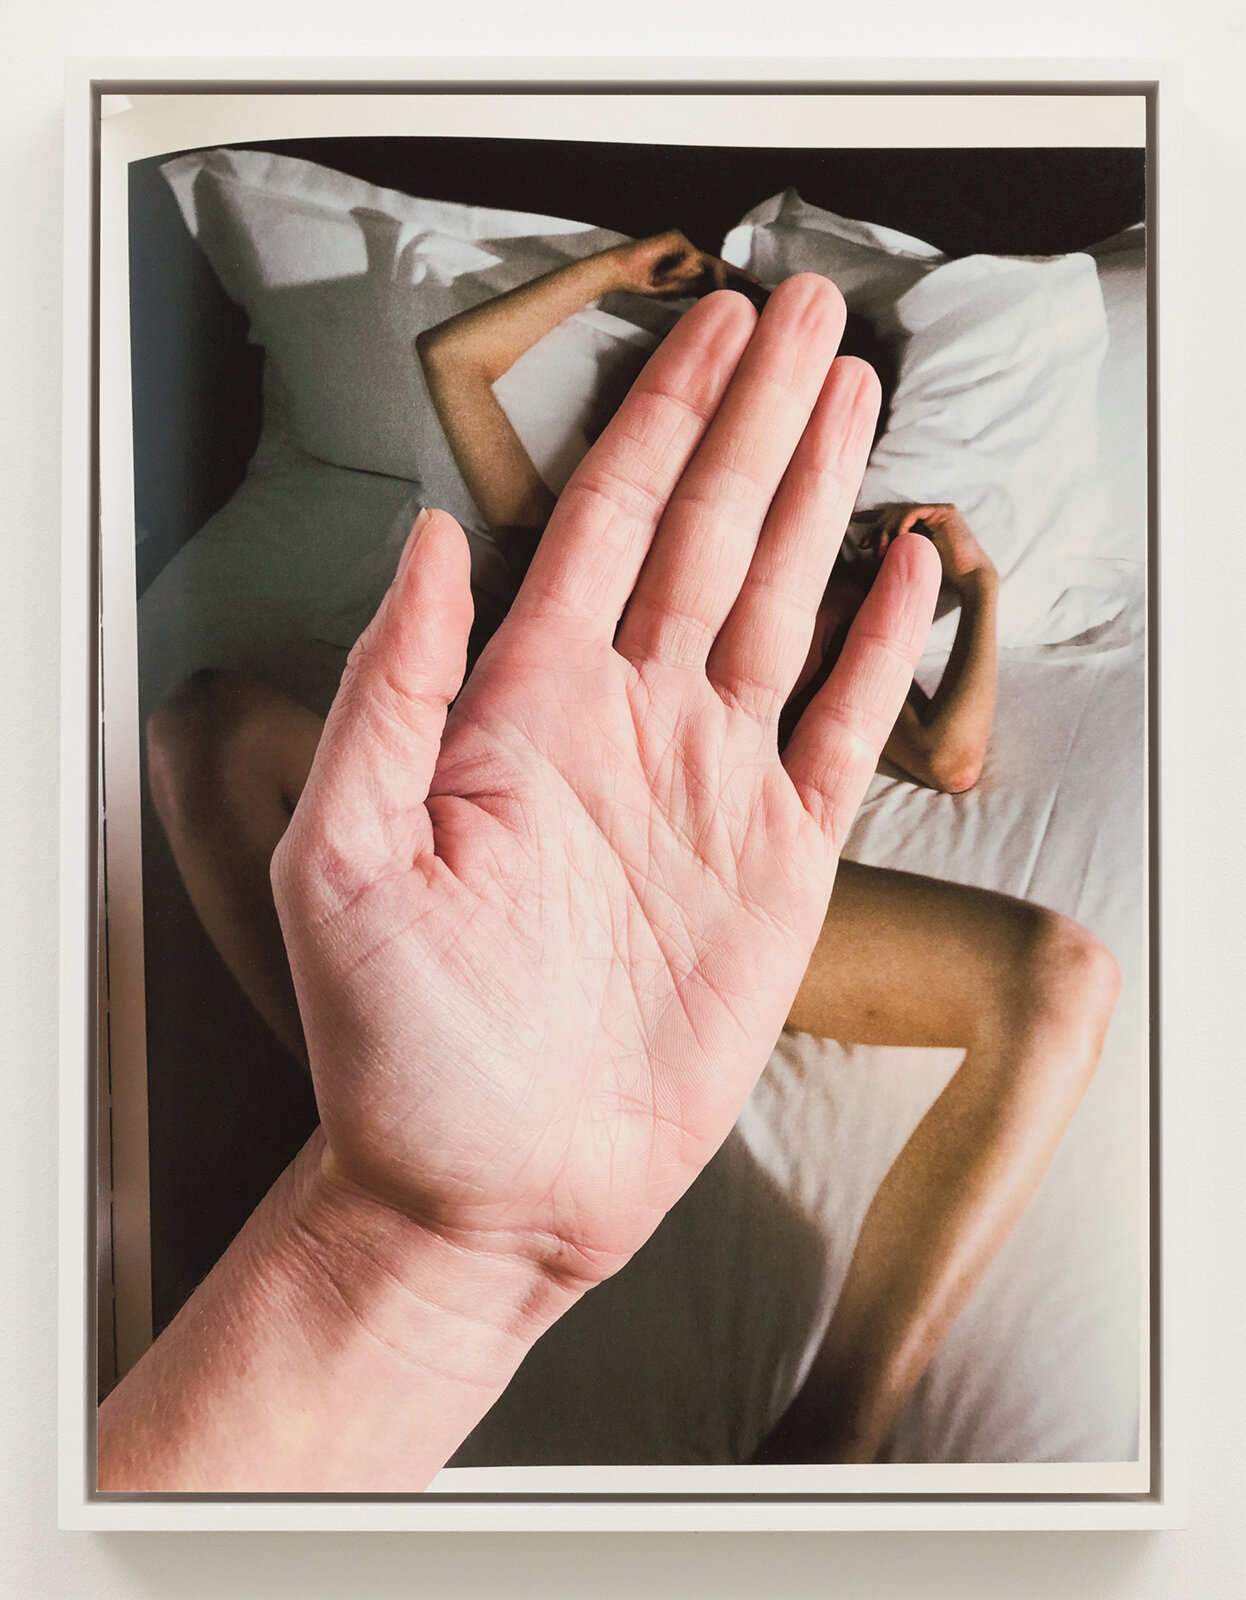 Dicke_HANDLE HER (Between Sheets and Covers), 2019_AD1078.jpg